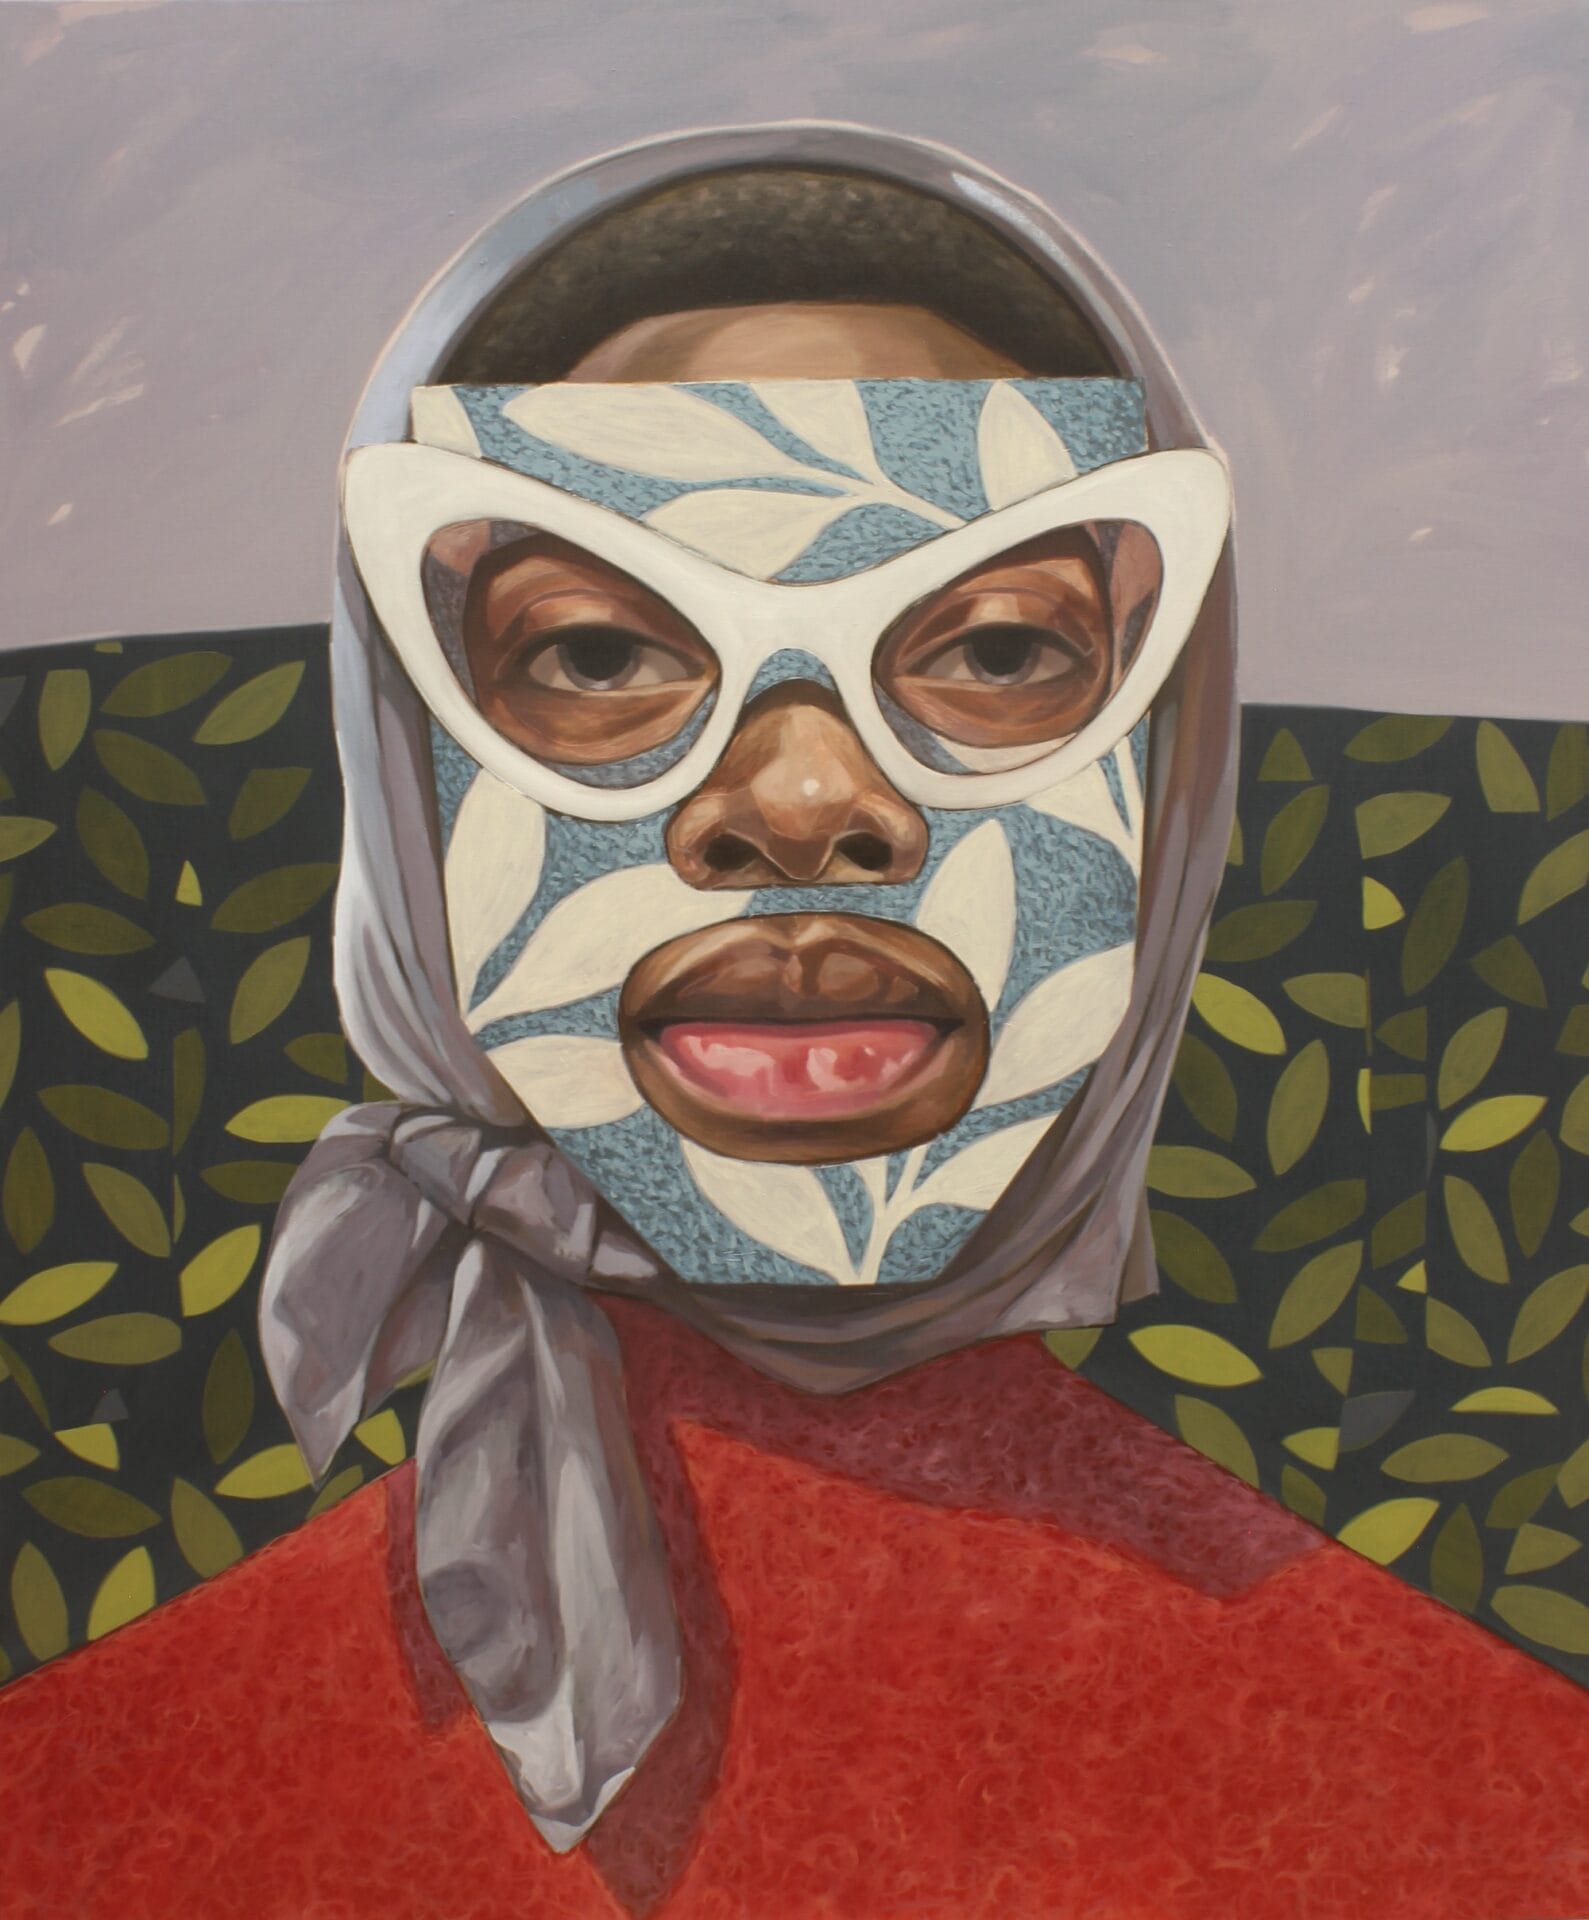 an oil painting of an imagined young black woman wearing a scarf on her head, a red top, a blue and white face covering that shows her eyes, nose, and mouth, and white cat-eye glasses